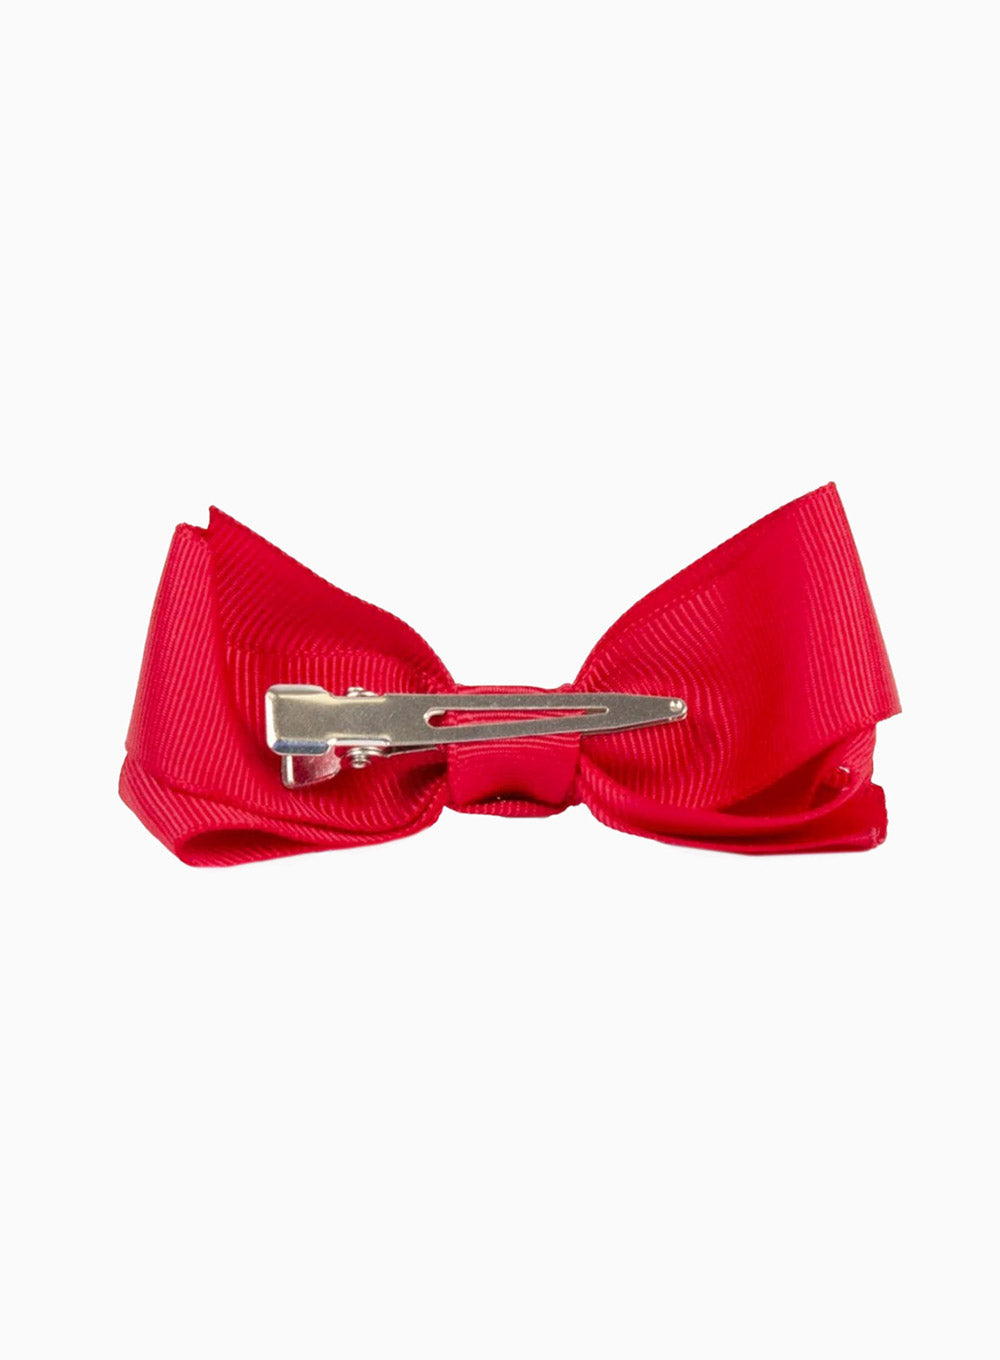 Large Bow Hair Clip in Ruby